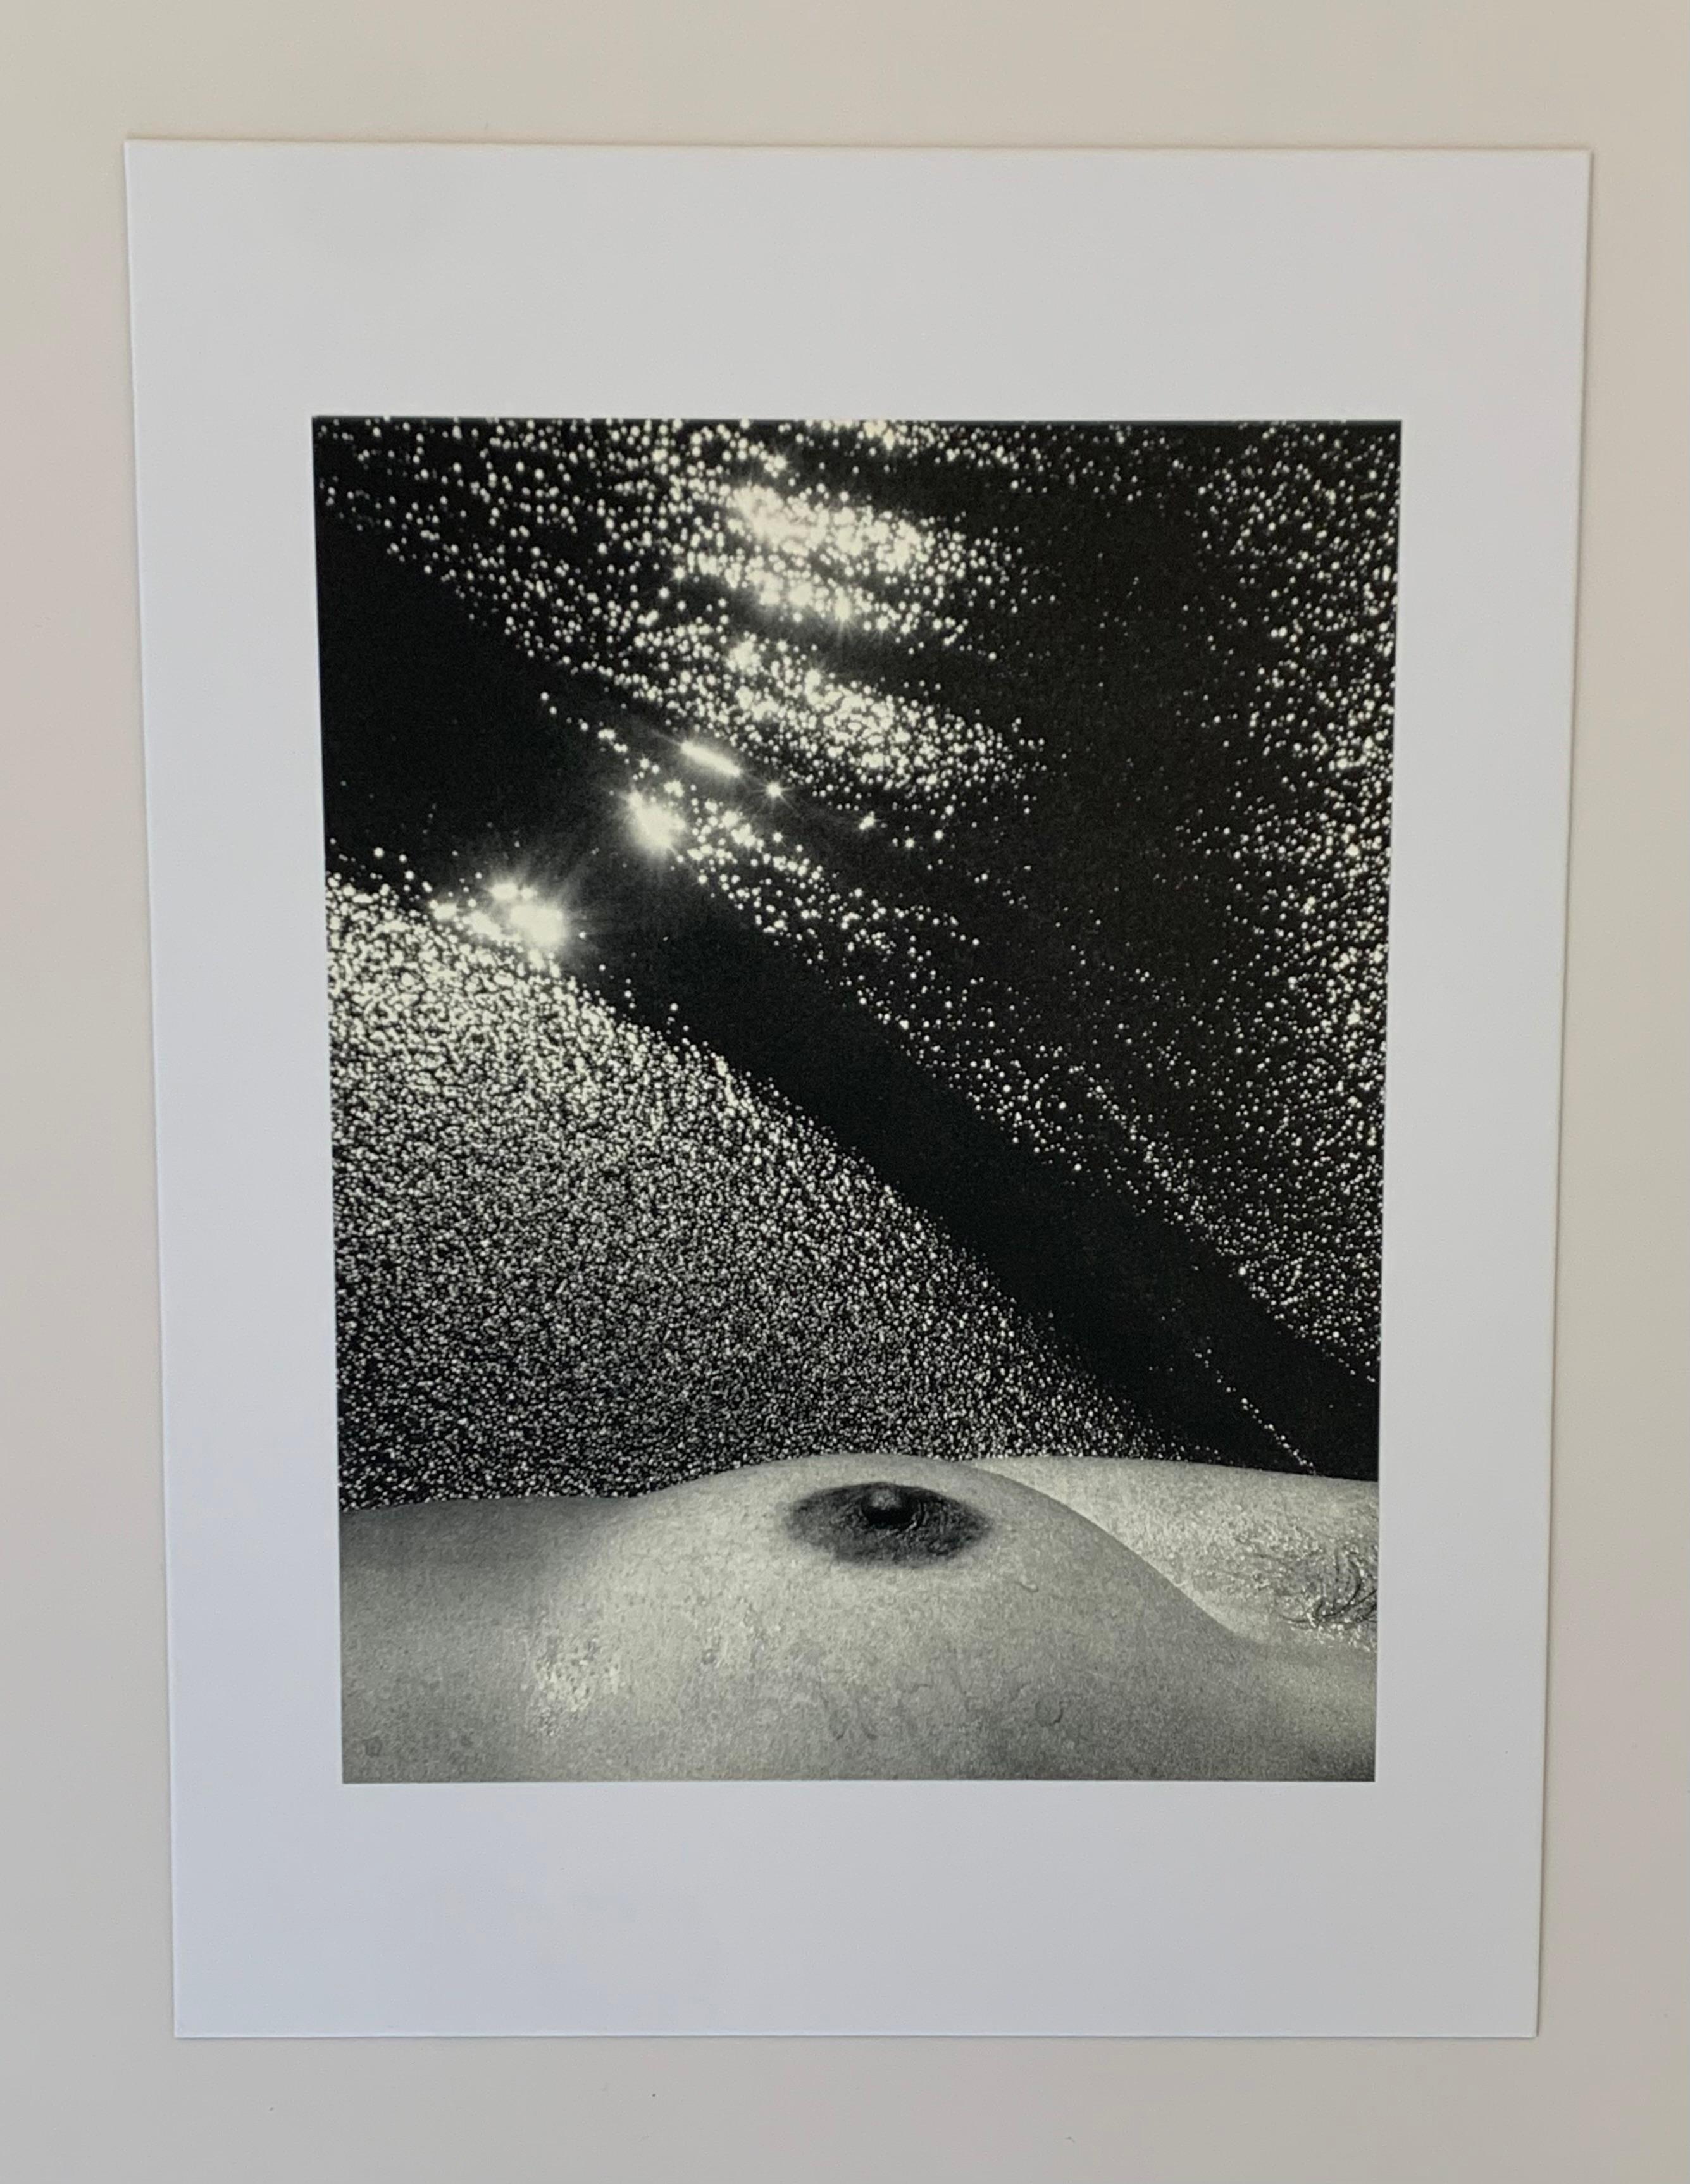 Nude Female Study 1968
by Lucien Clergue

A macros shot of a nude females breast with a complimentary negative background.

Unframed
Matted
Overall size : 12 x 16